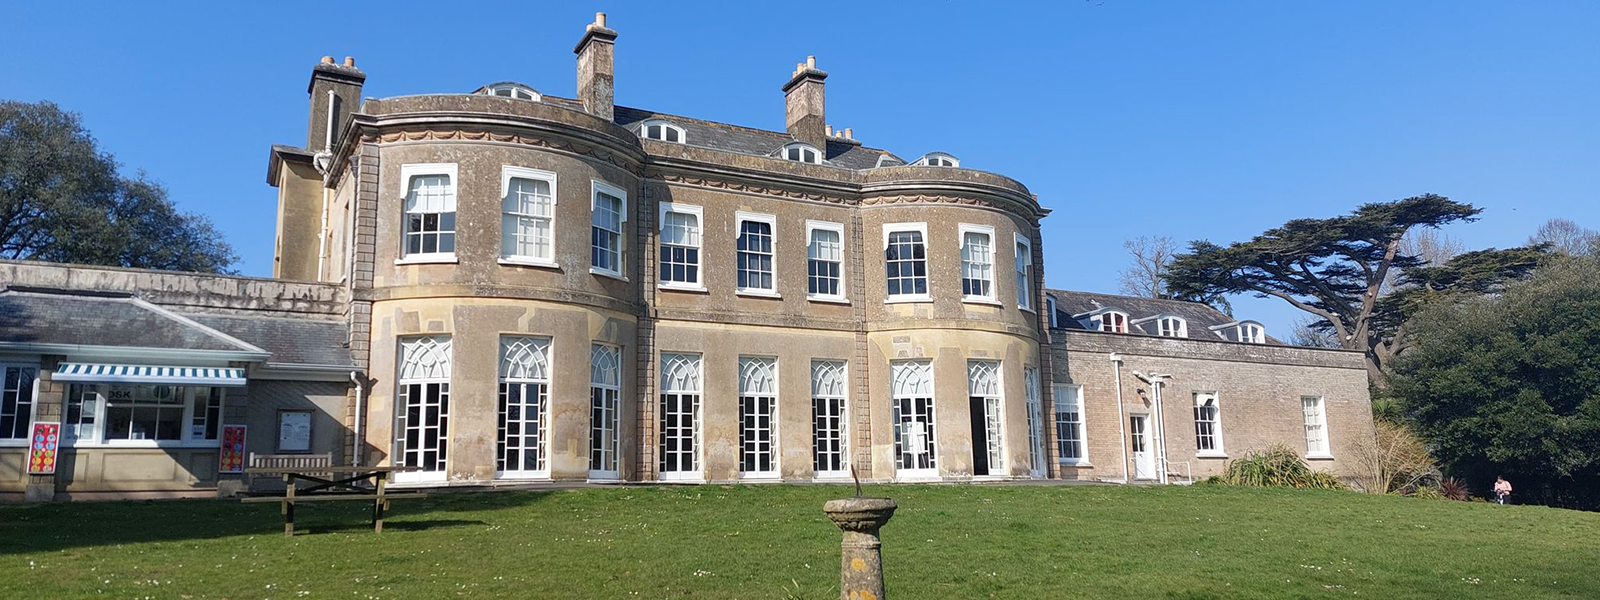 South side of Upton House with sundial